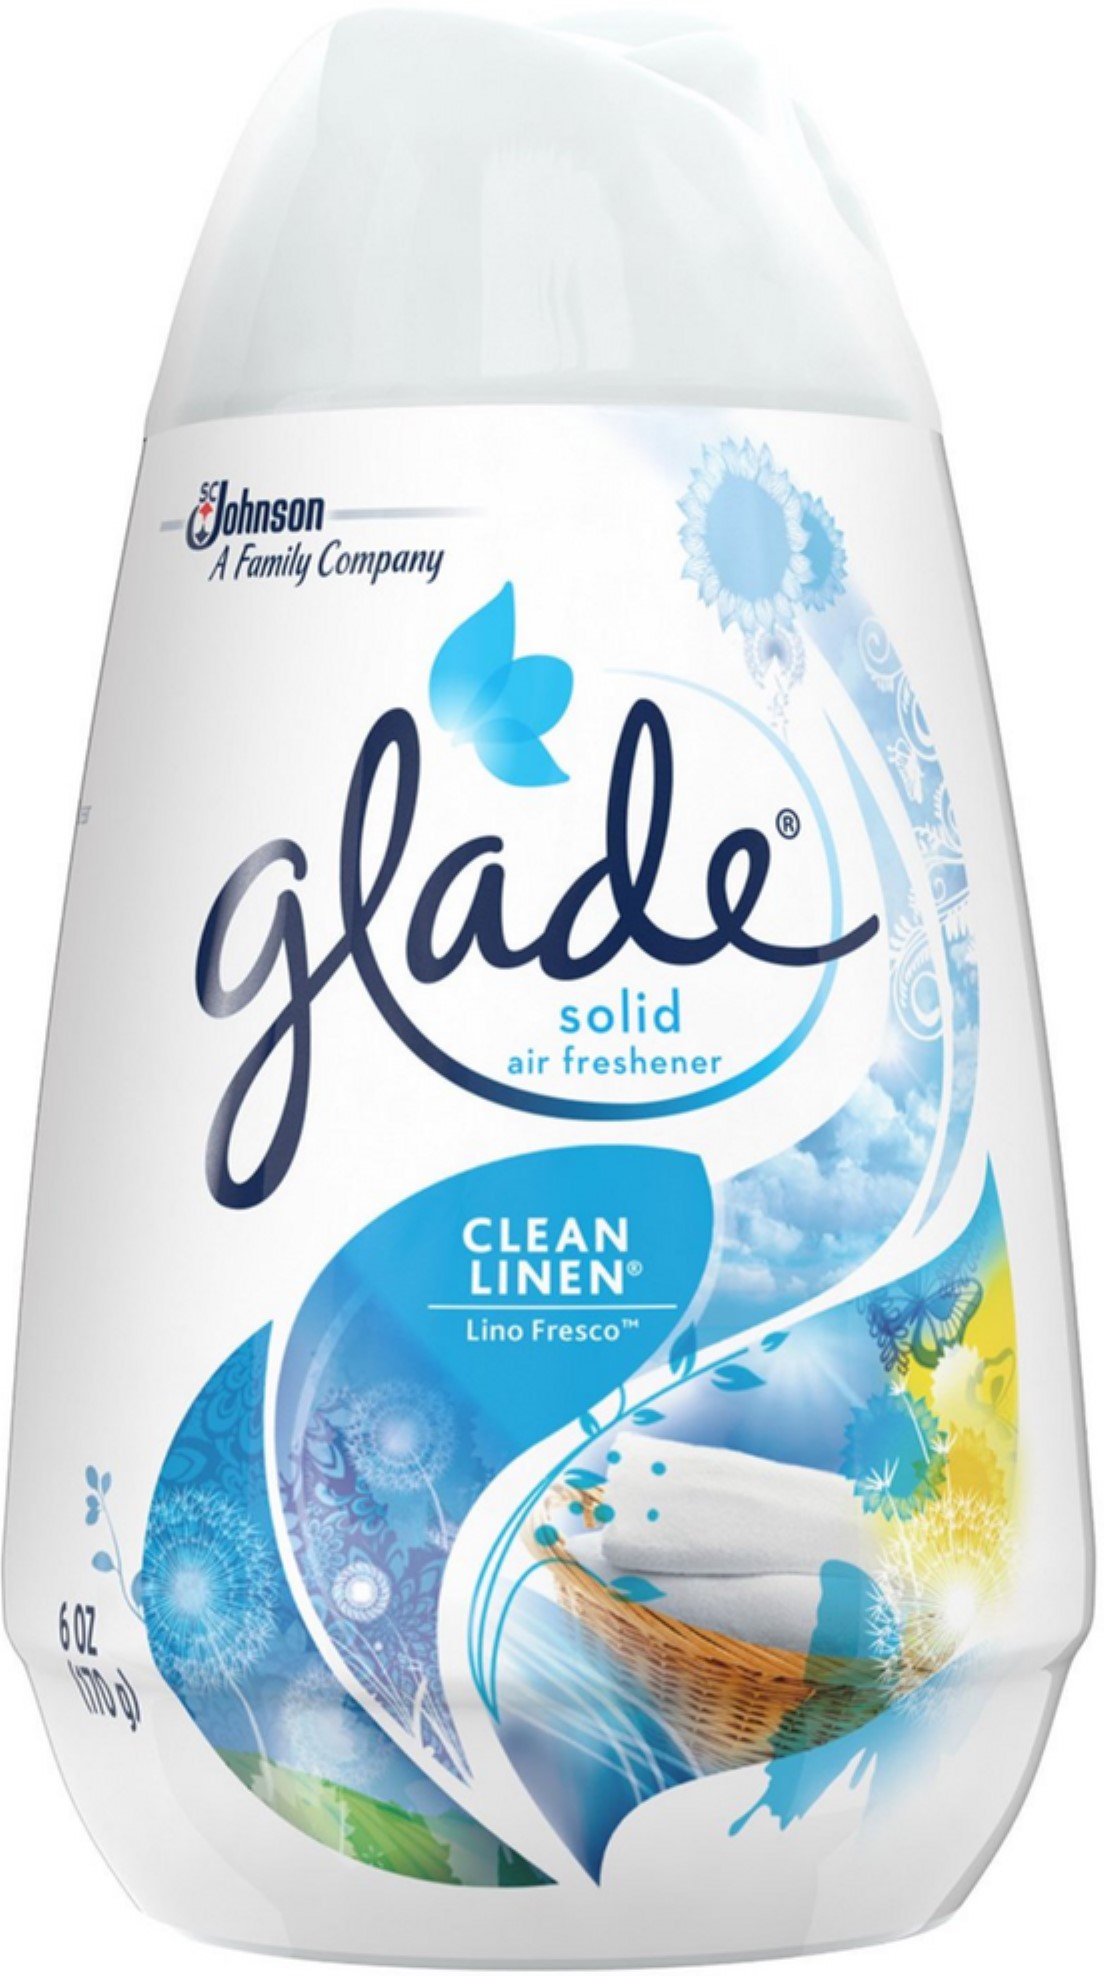 6-Oz Glade Solid Air Freshener (Clean Linen) $0.70 w/ S&S + Free S&H w/ Prime or $25+